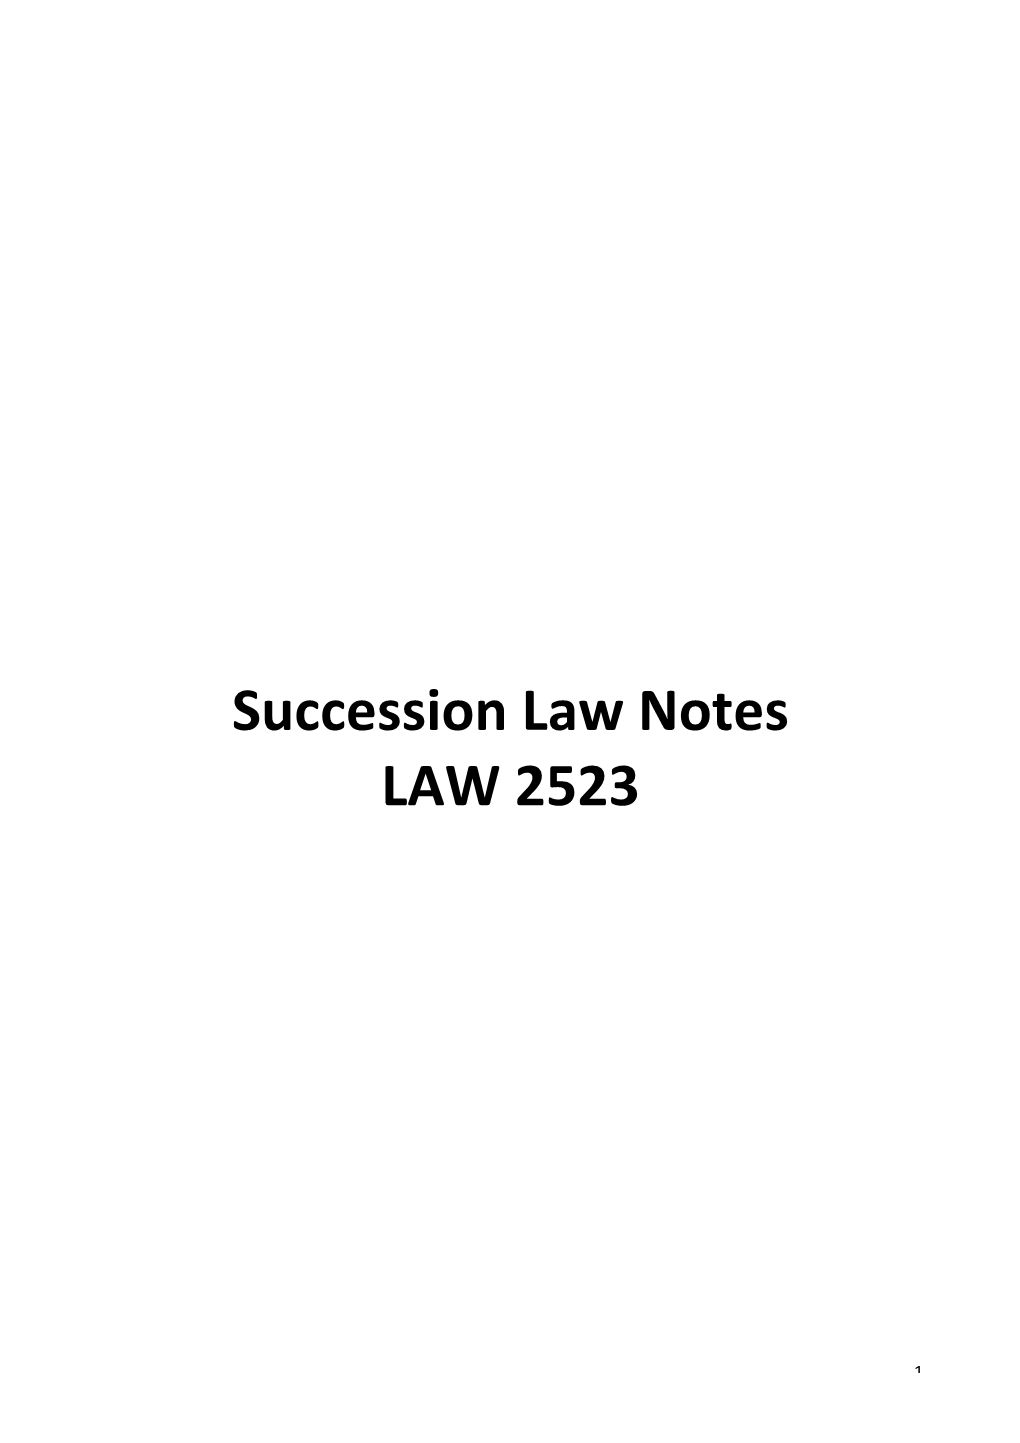 Succession Law Notes LAW 2523